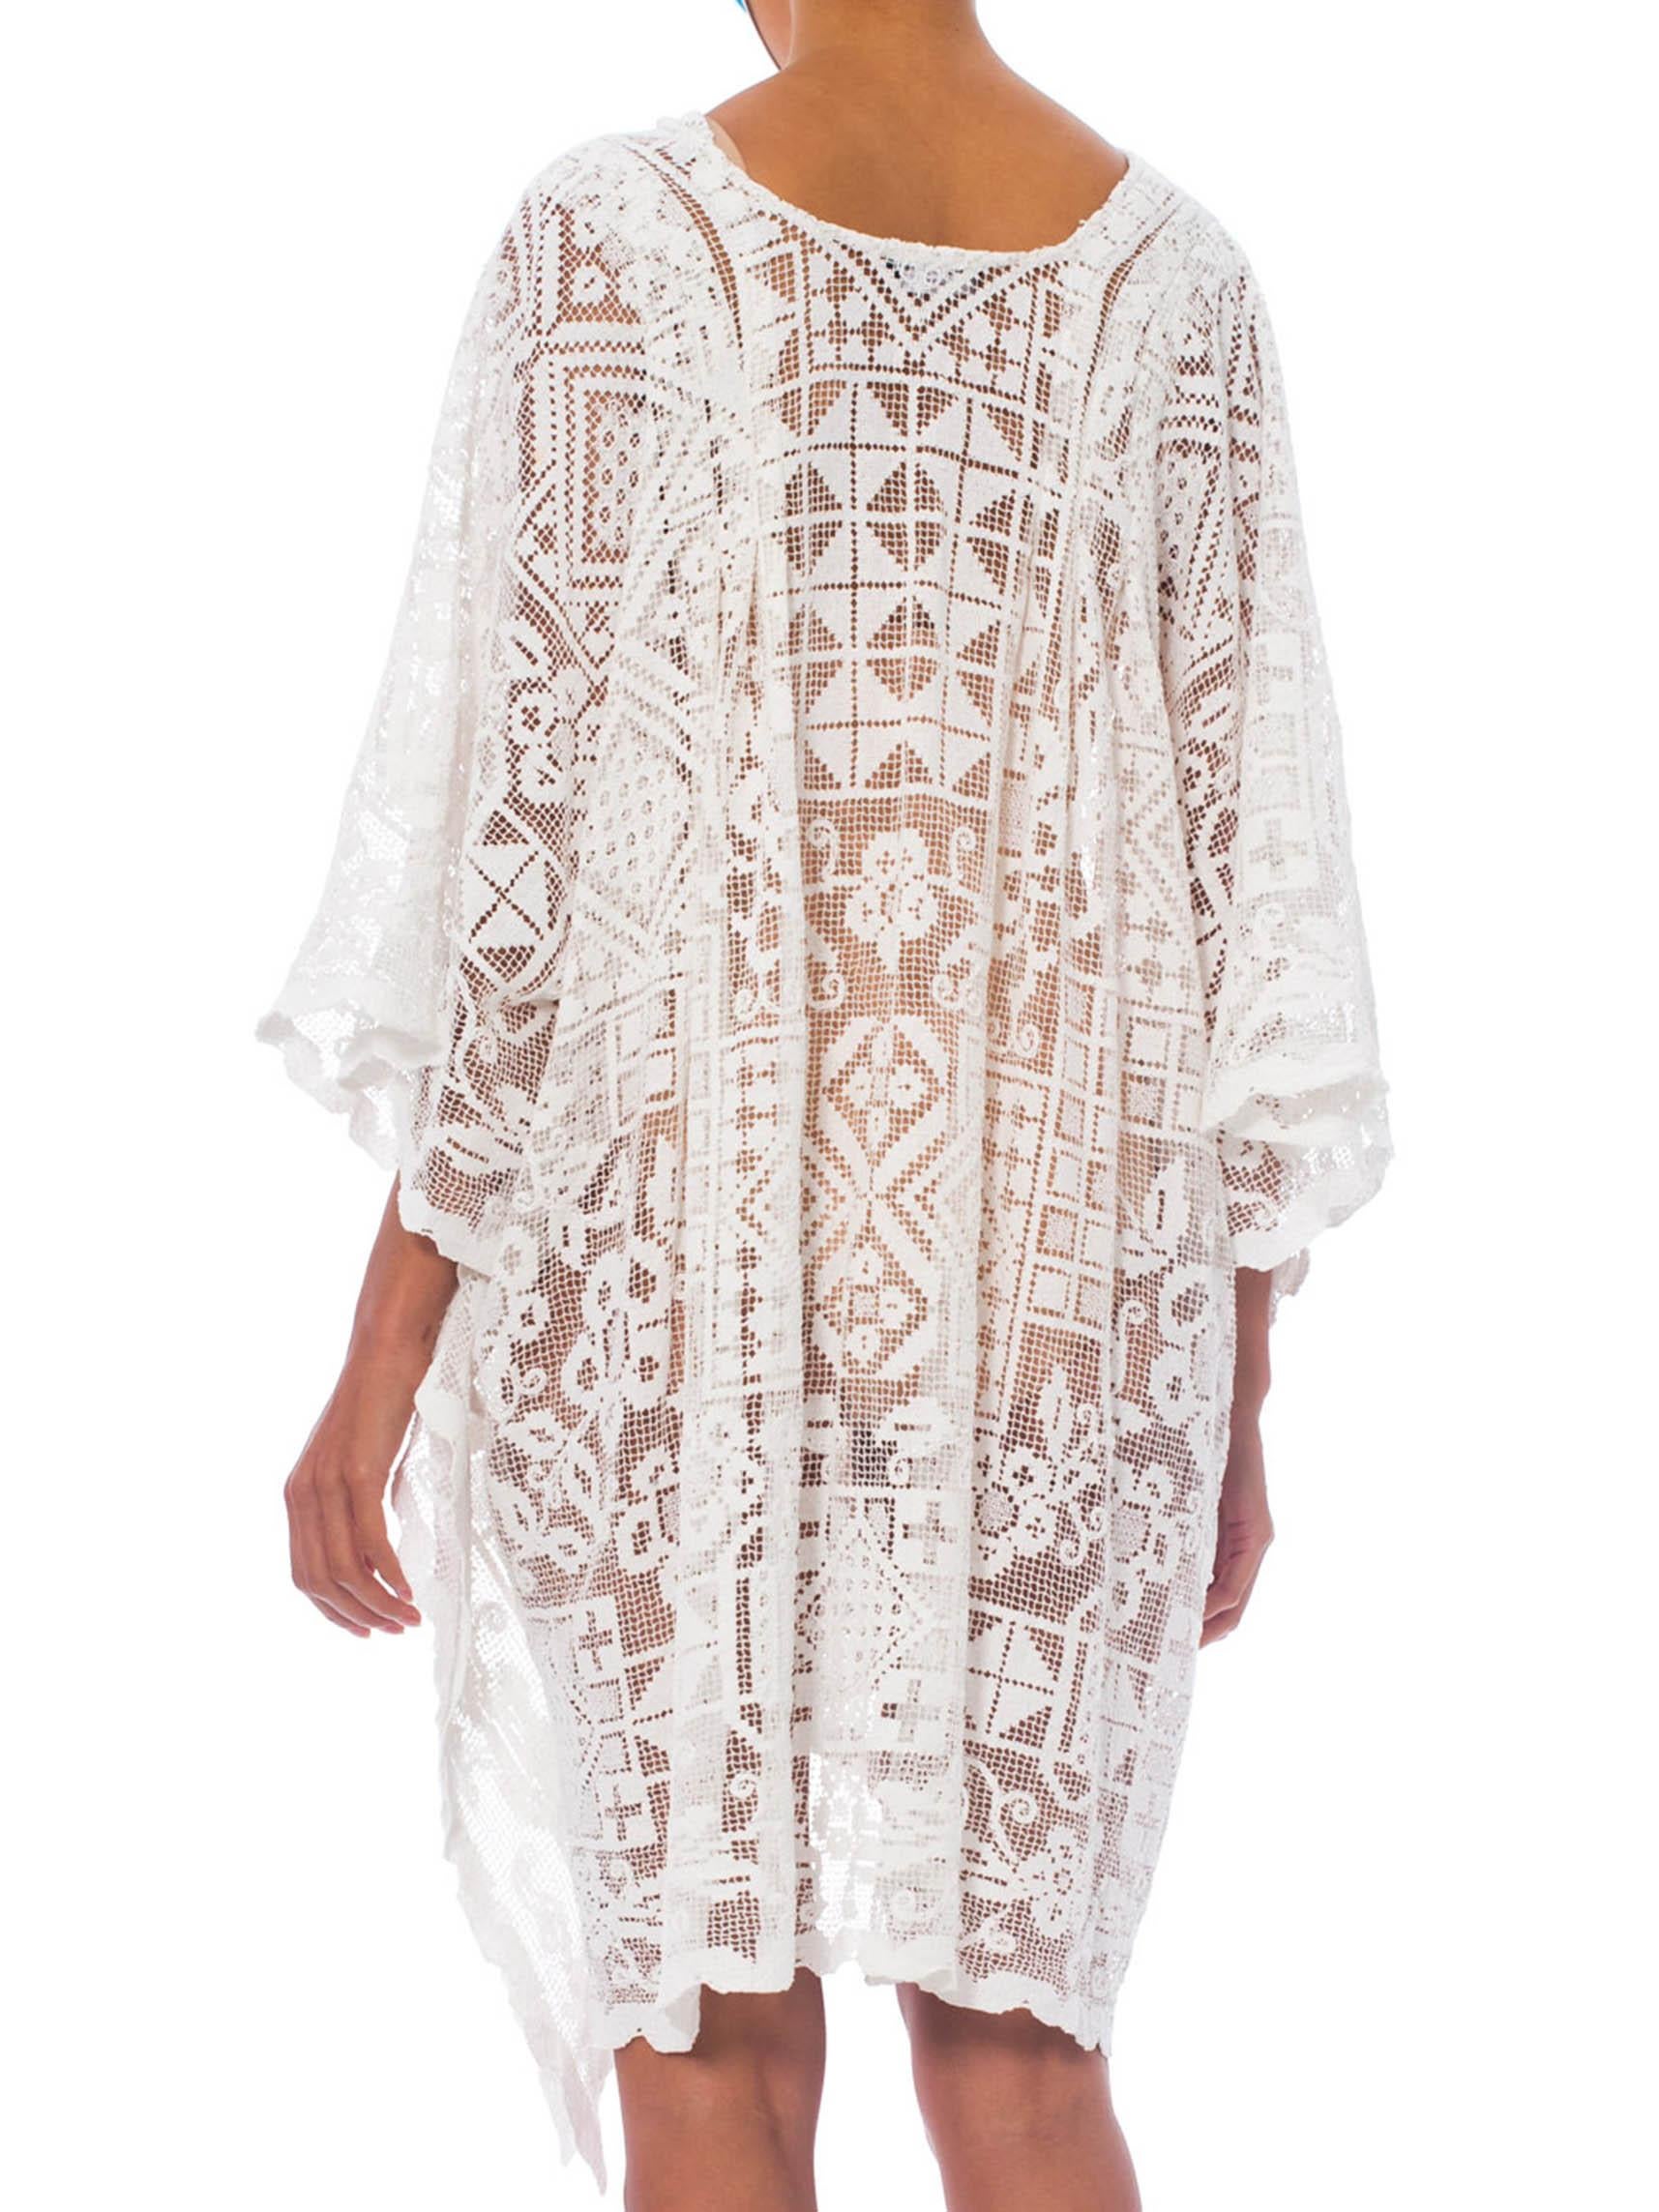 MORPHEW COLLECTION White Cotton Handmade Filet Lace Kaftan Tunic Beach Cover-Up In Excellent Condition In New York, NY